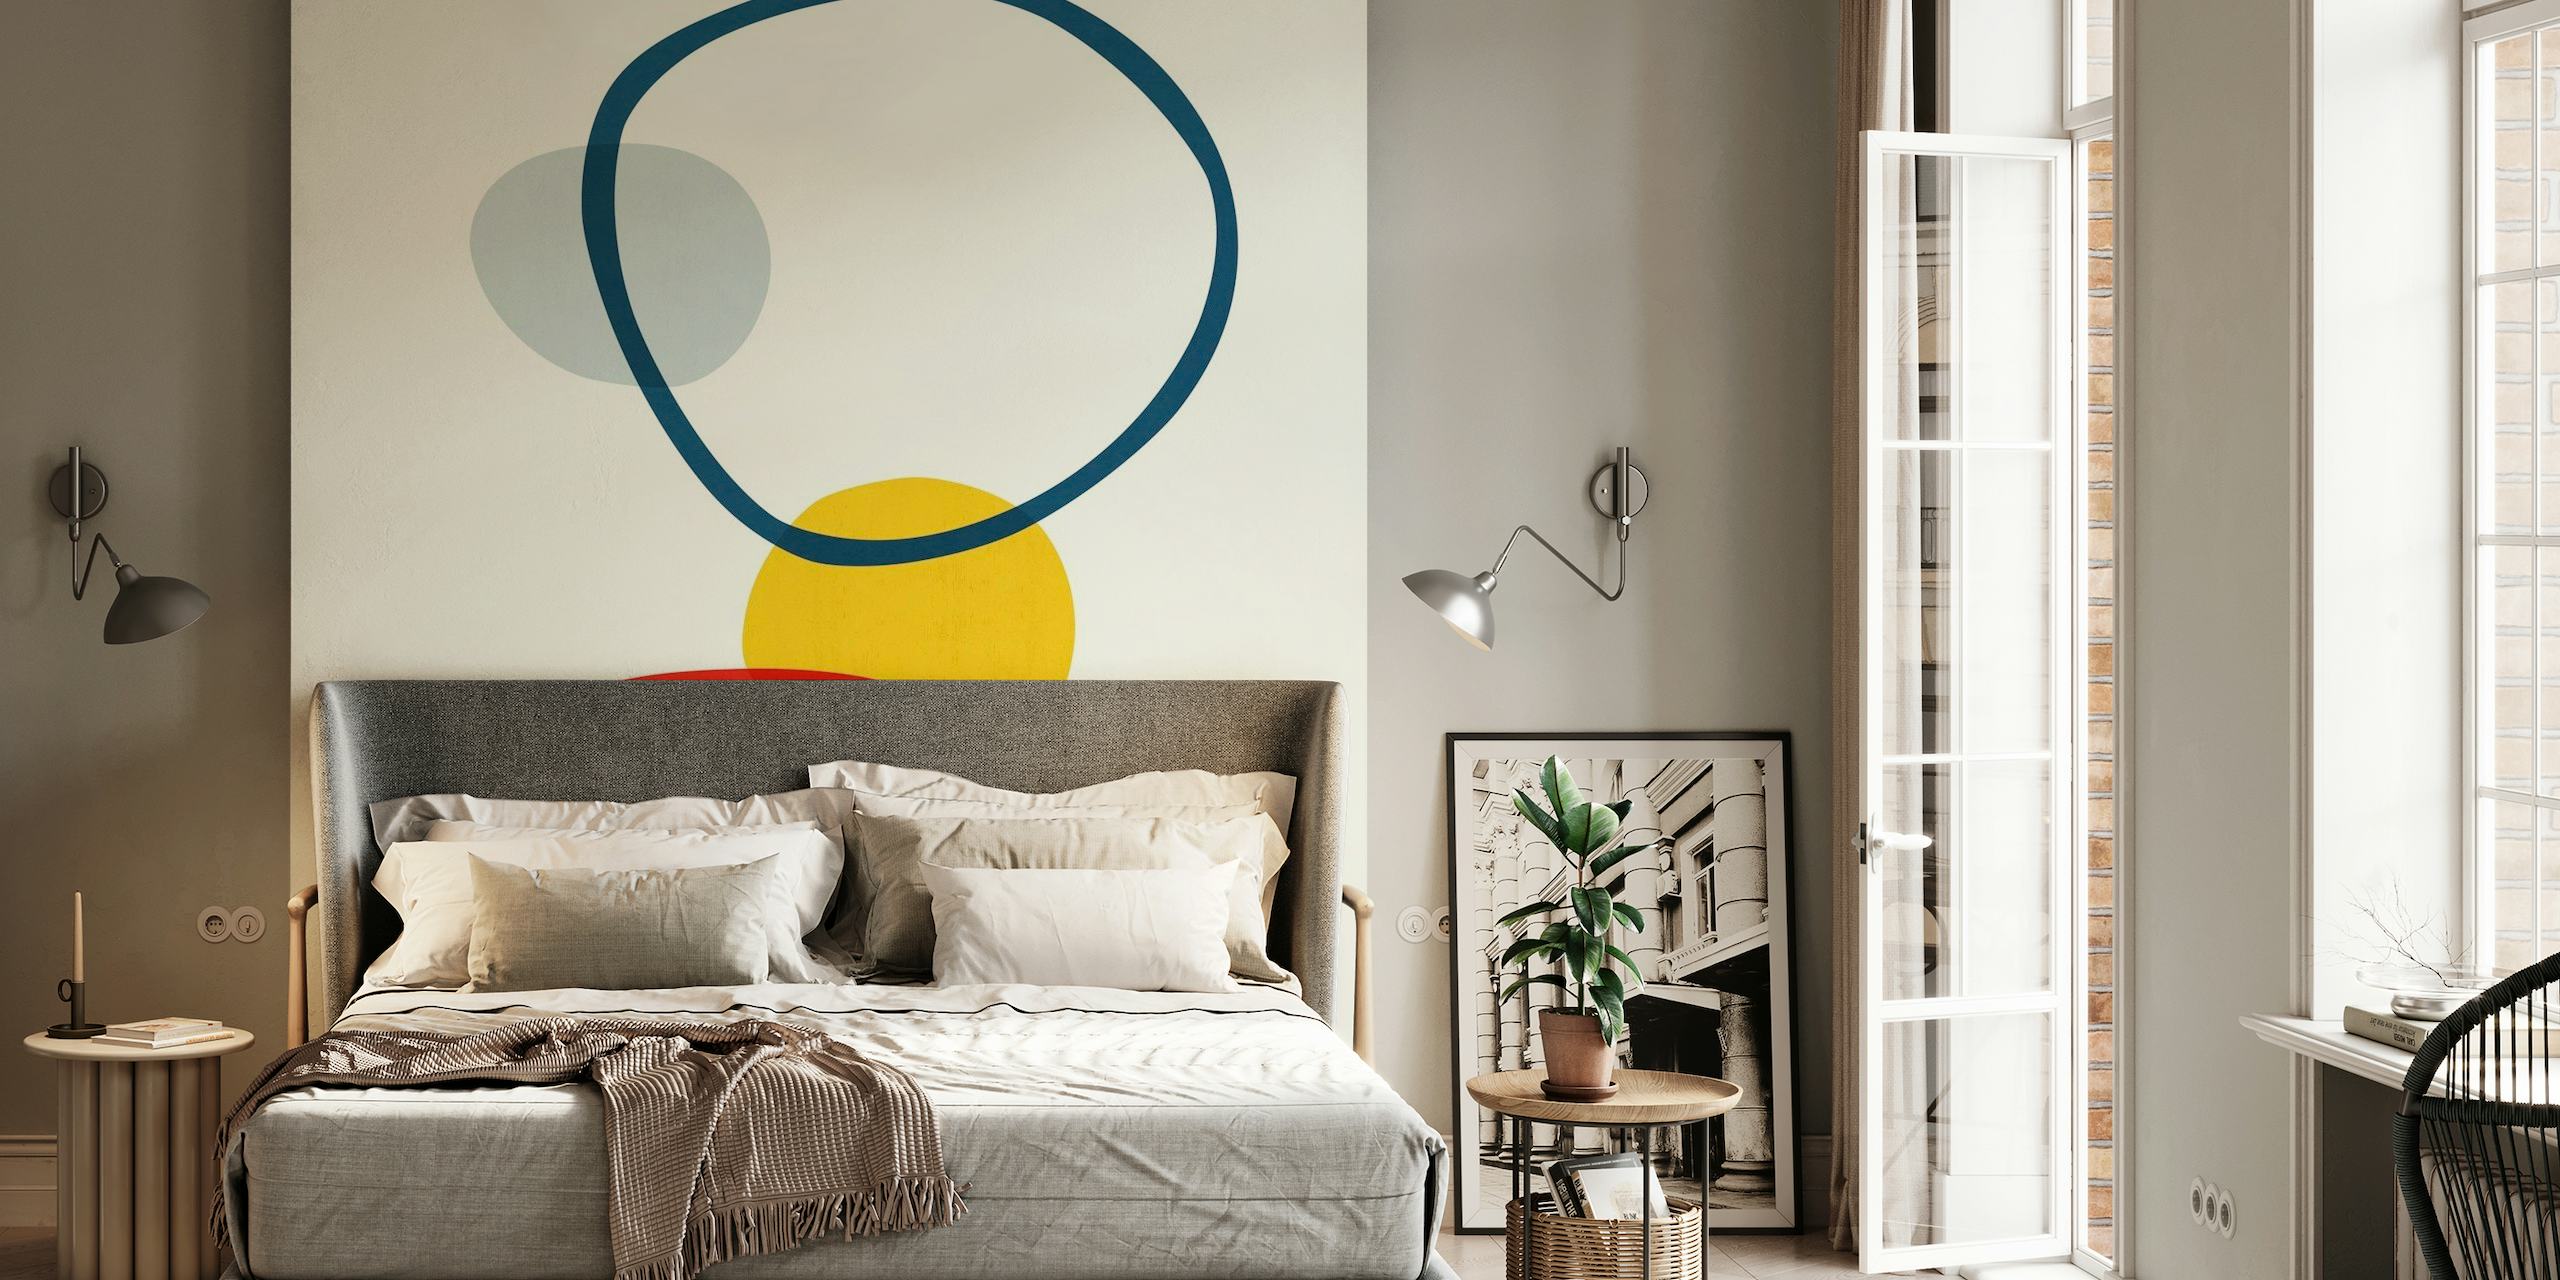 Modern abstract shapes wall mural with red square, yellow circle, and blue ring on a light background